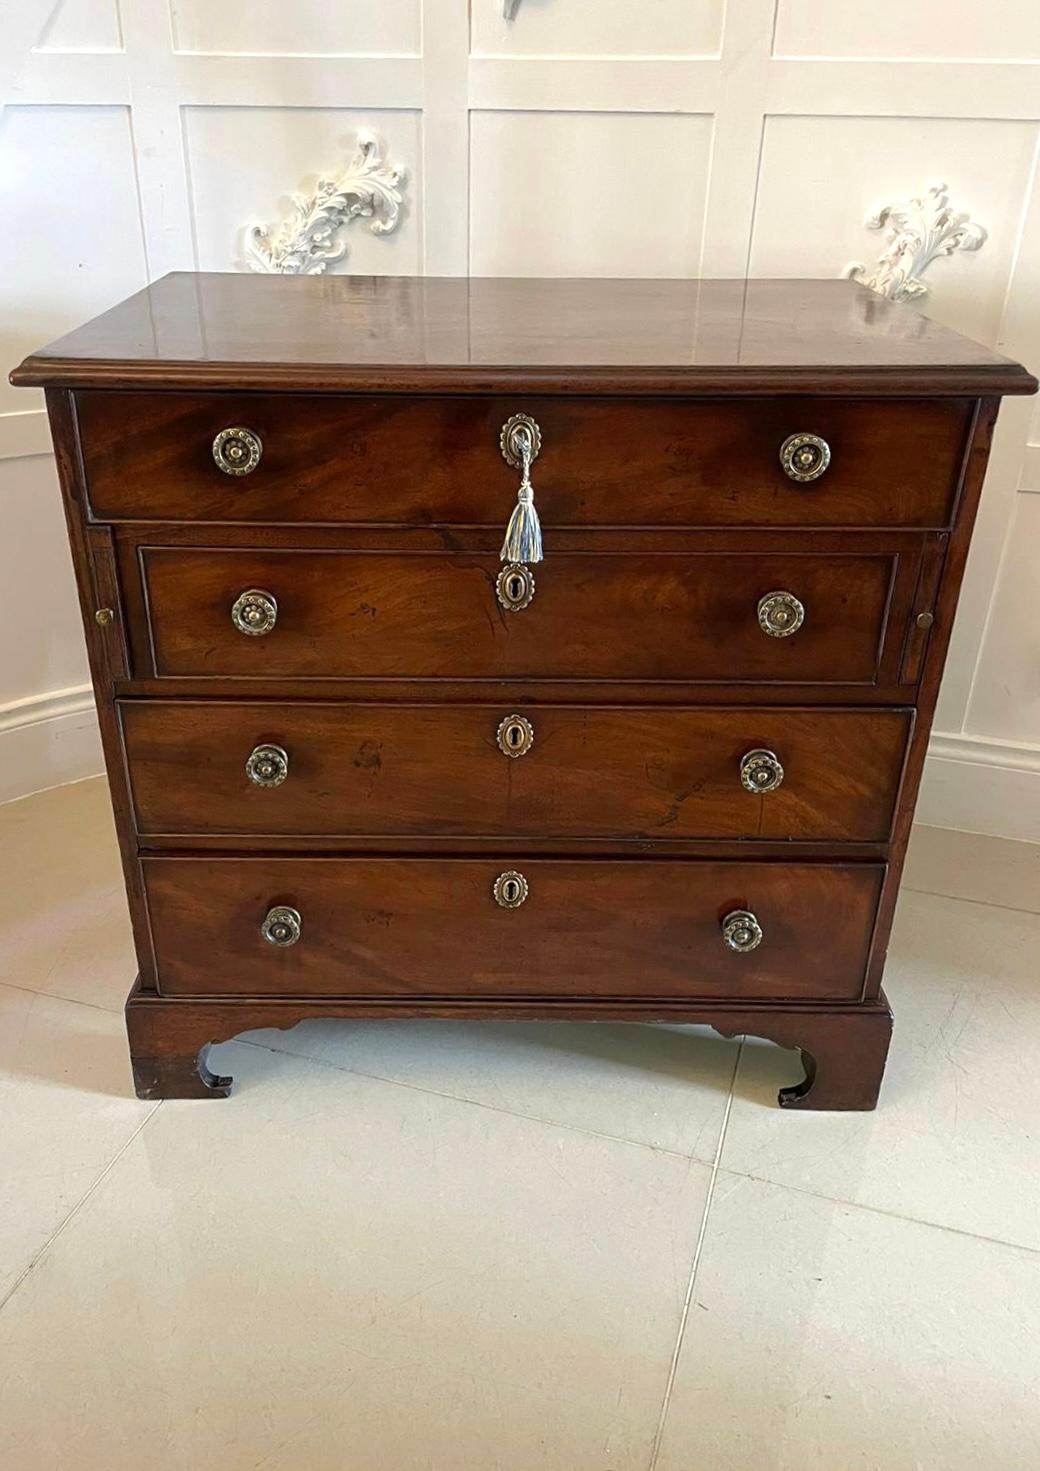 Outstanding quality unusual antique George III mahogany bachelor's chest having a magnificent quality figured mahogany top with a moulded edge above four figured mahogany cockbeeded oak lined drawers with brass handles, attractive escutcheons and